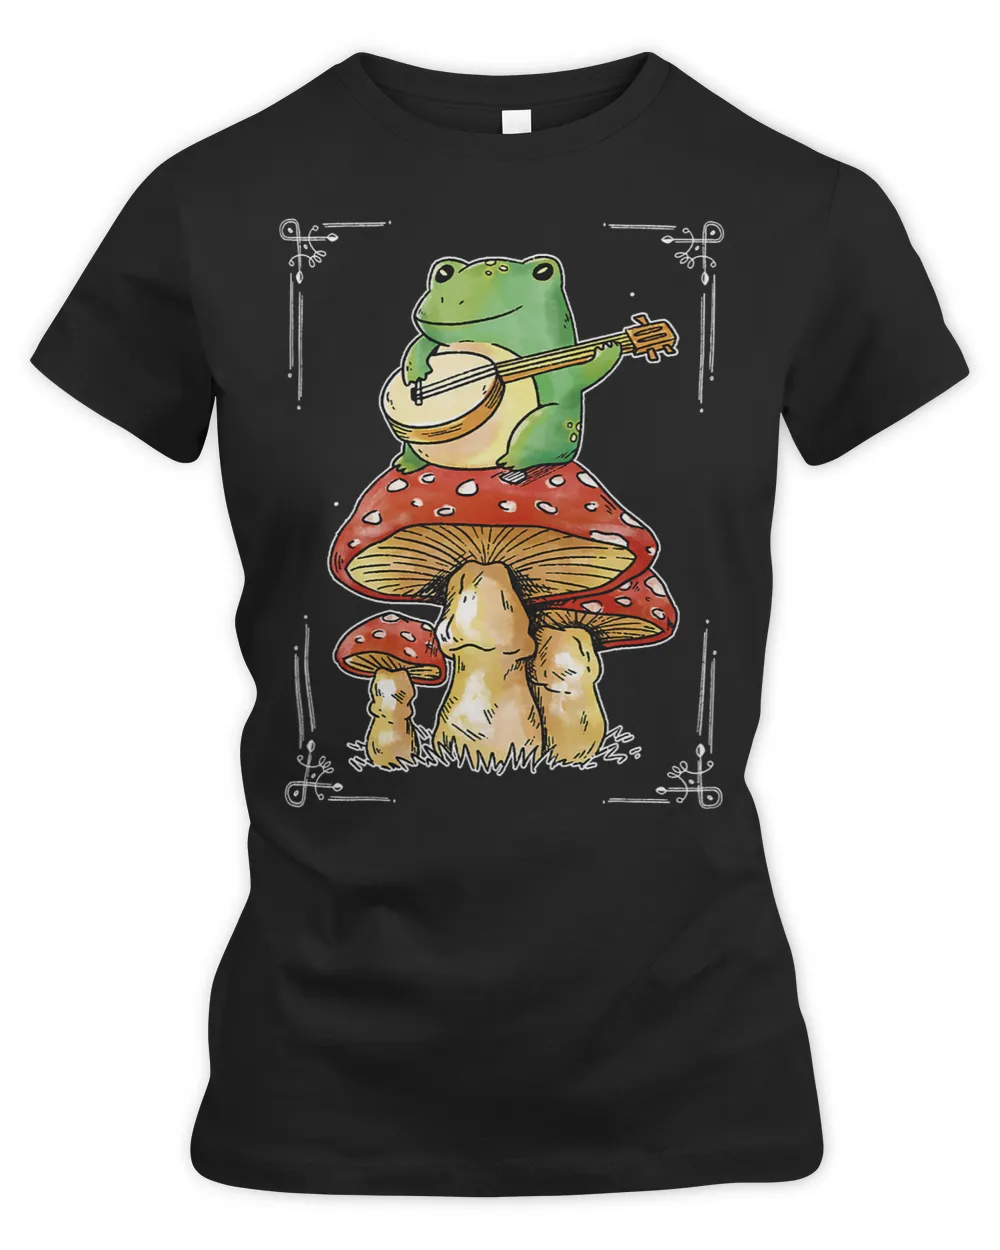 Frogs Cute Cottagecore Aesthetic Frog Playing Banjo on Mushroom45